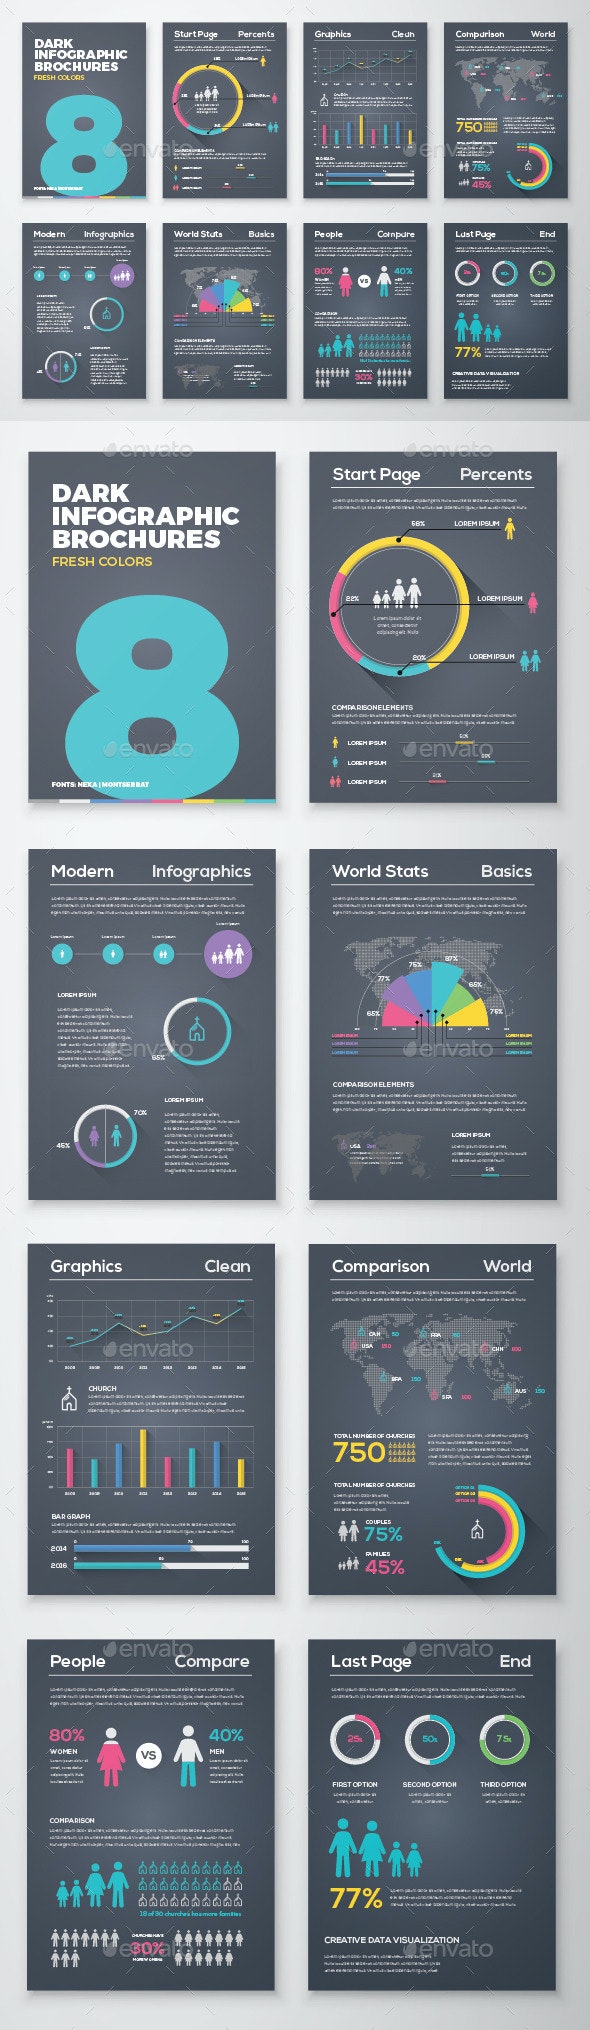 Premium Vector | Pack of three dark infographic banners with color details